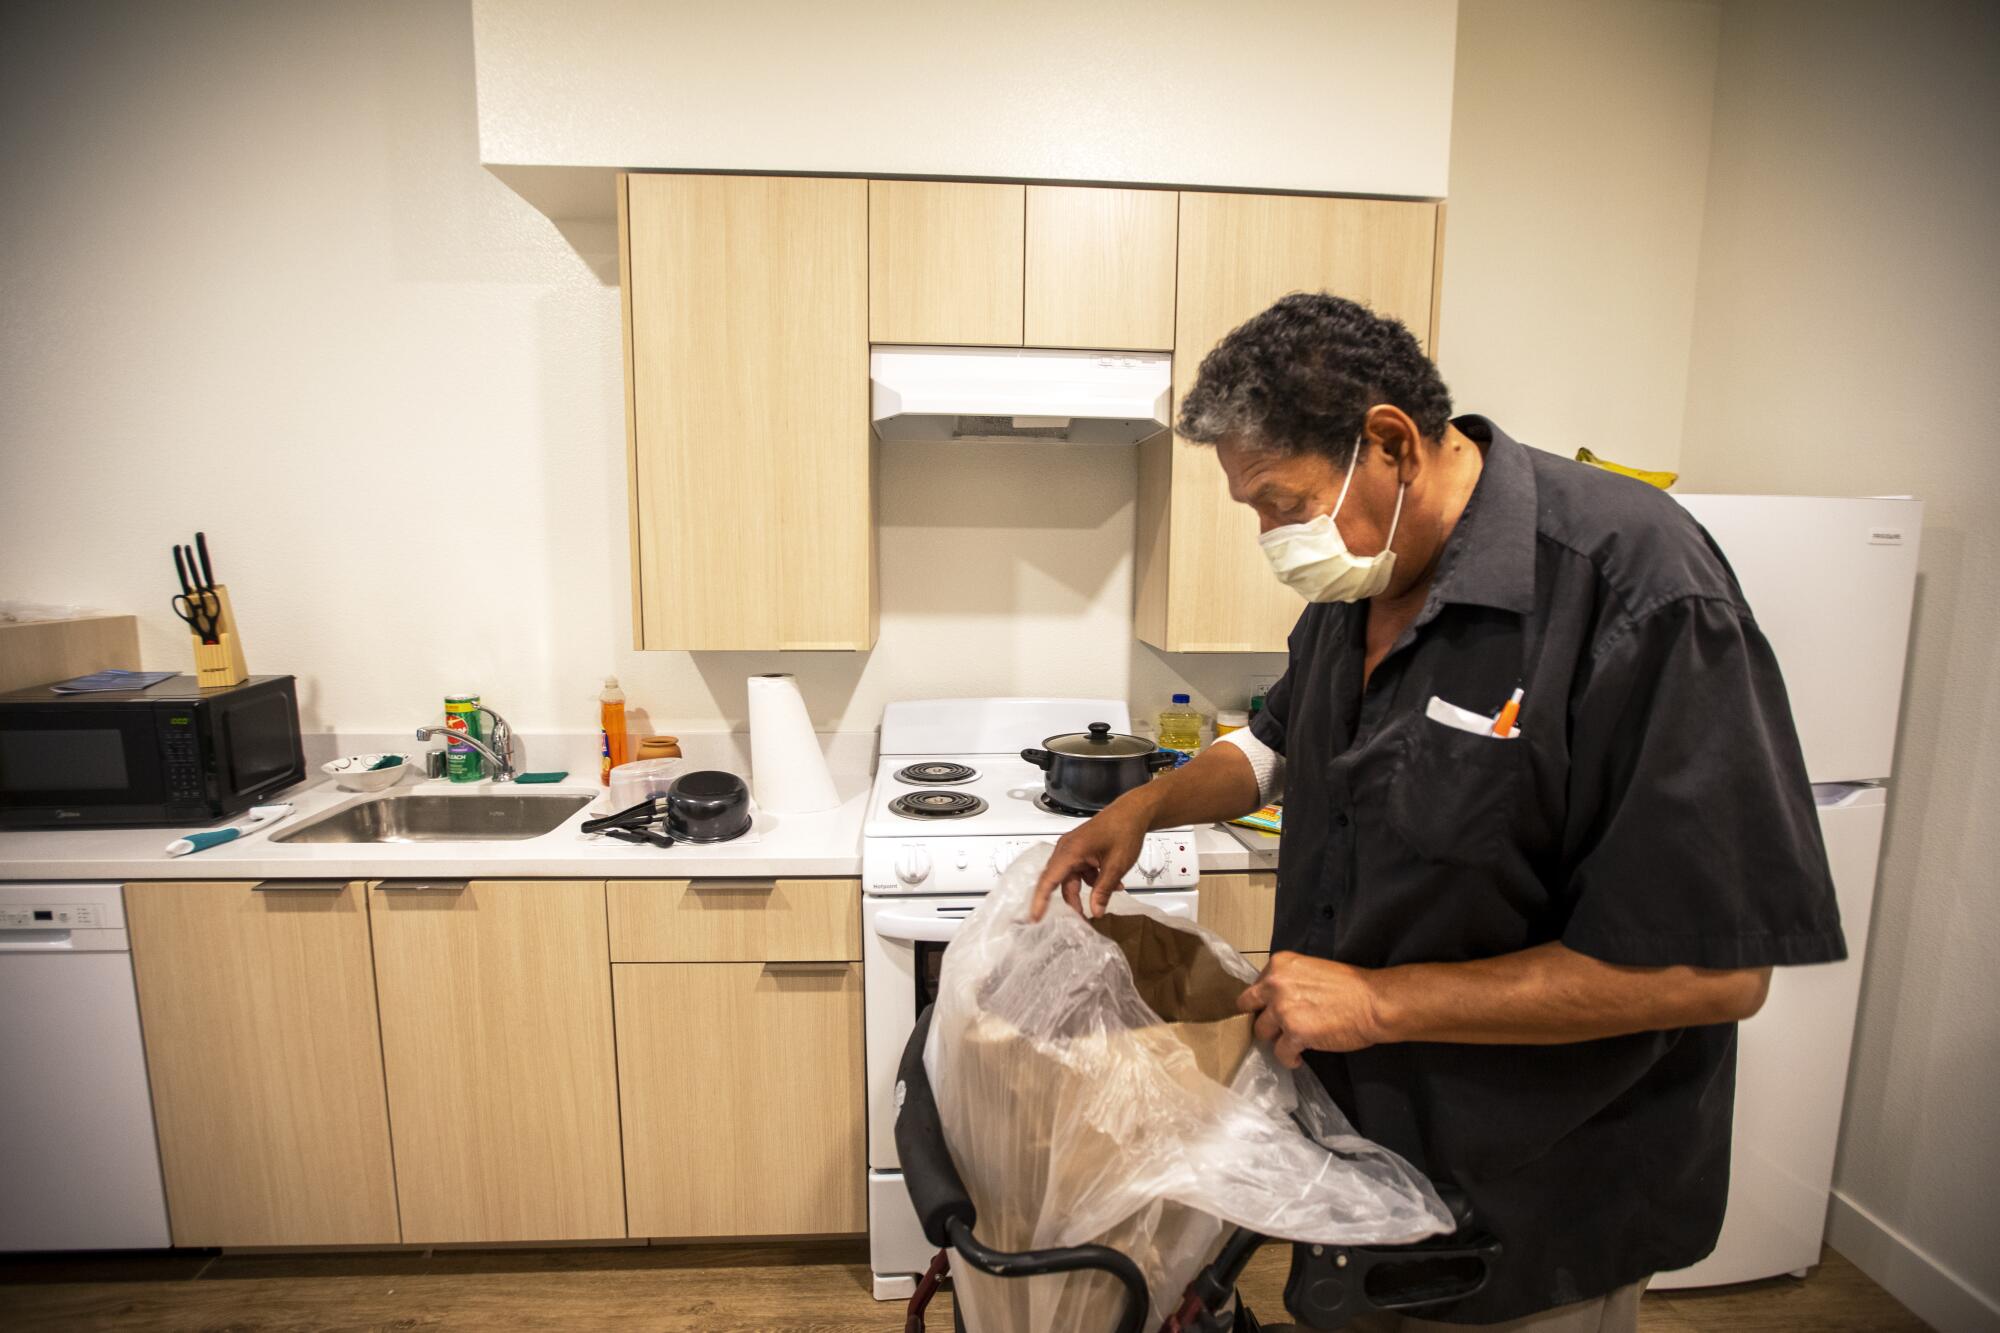 Angel Martinez puts away groceries inside his new home at Washington View Apartments in Los Angeles.